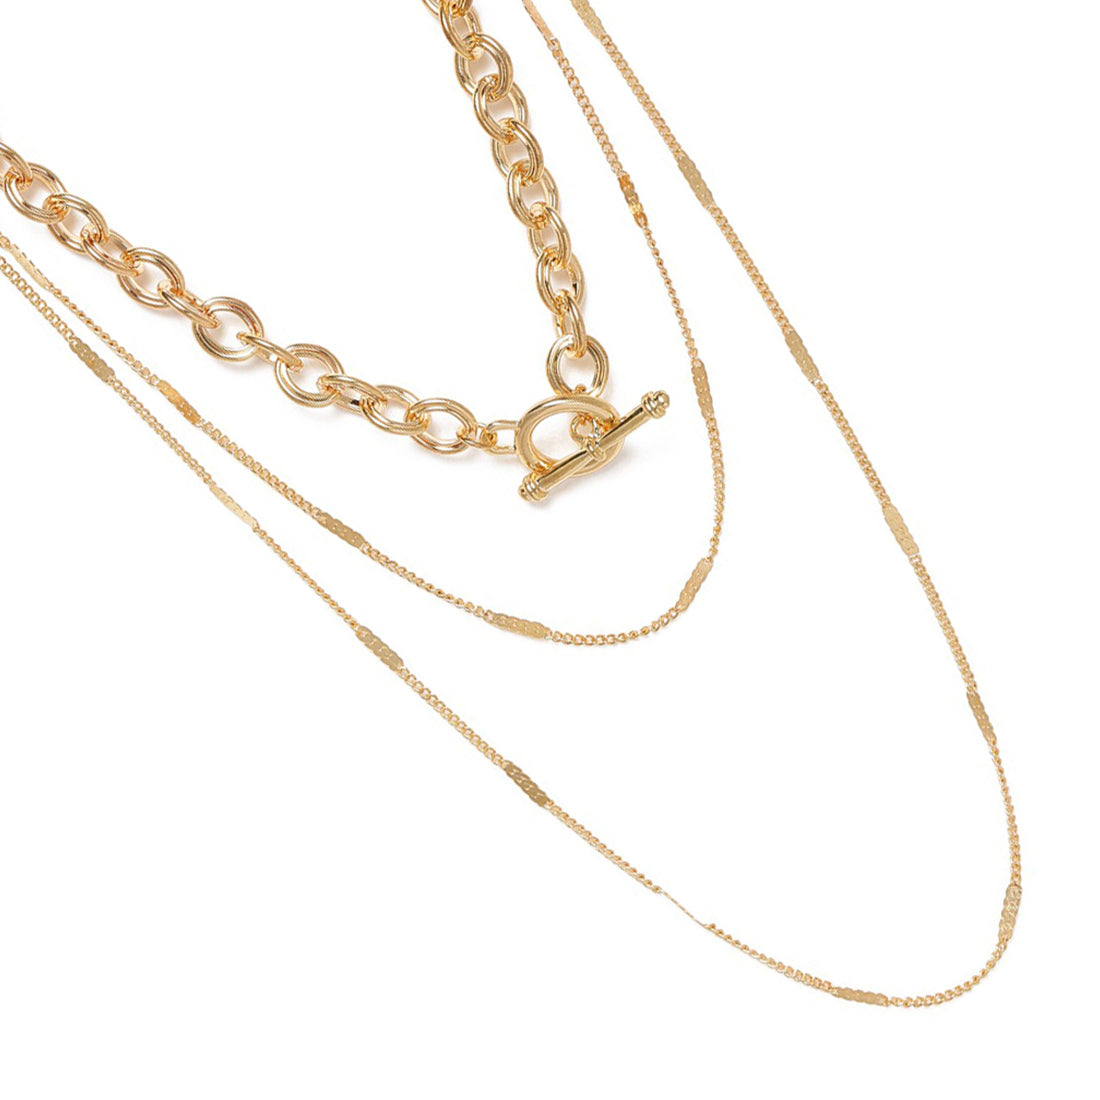 Chunky Bold Gold-Toned Chain Link Layered Necklace